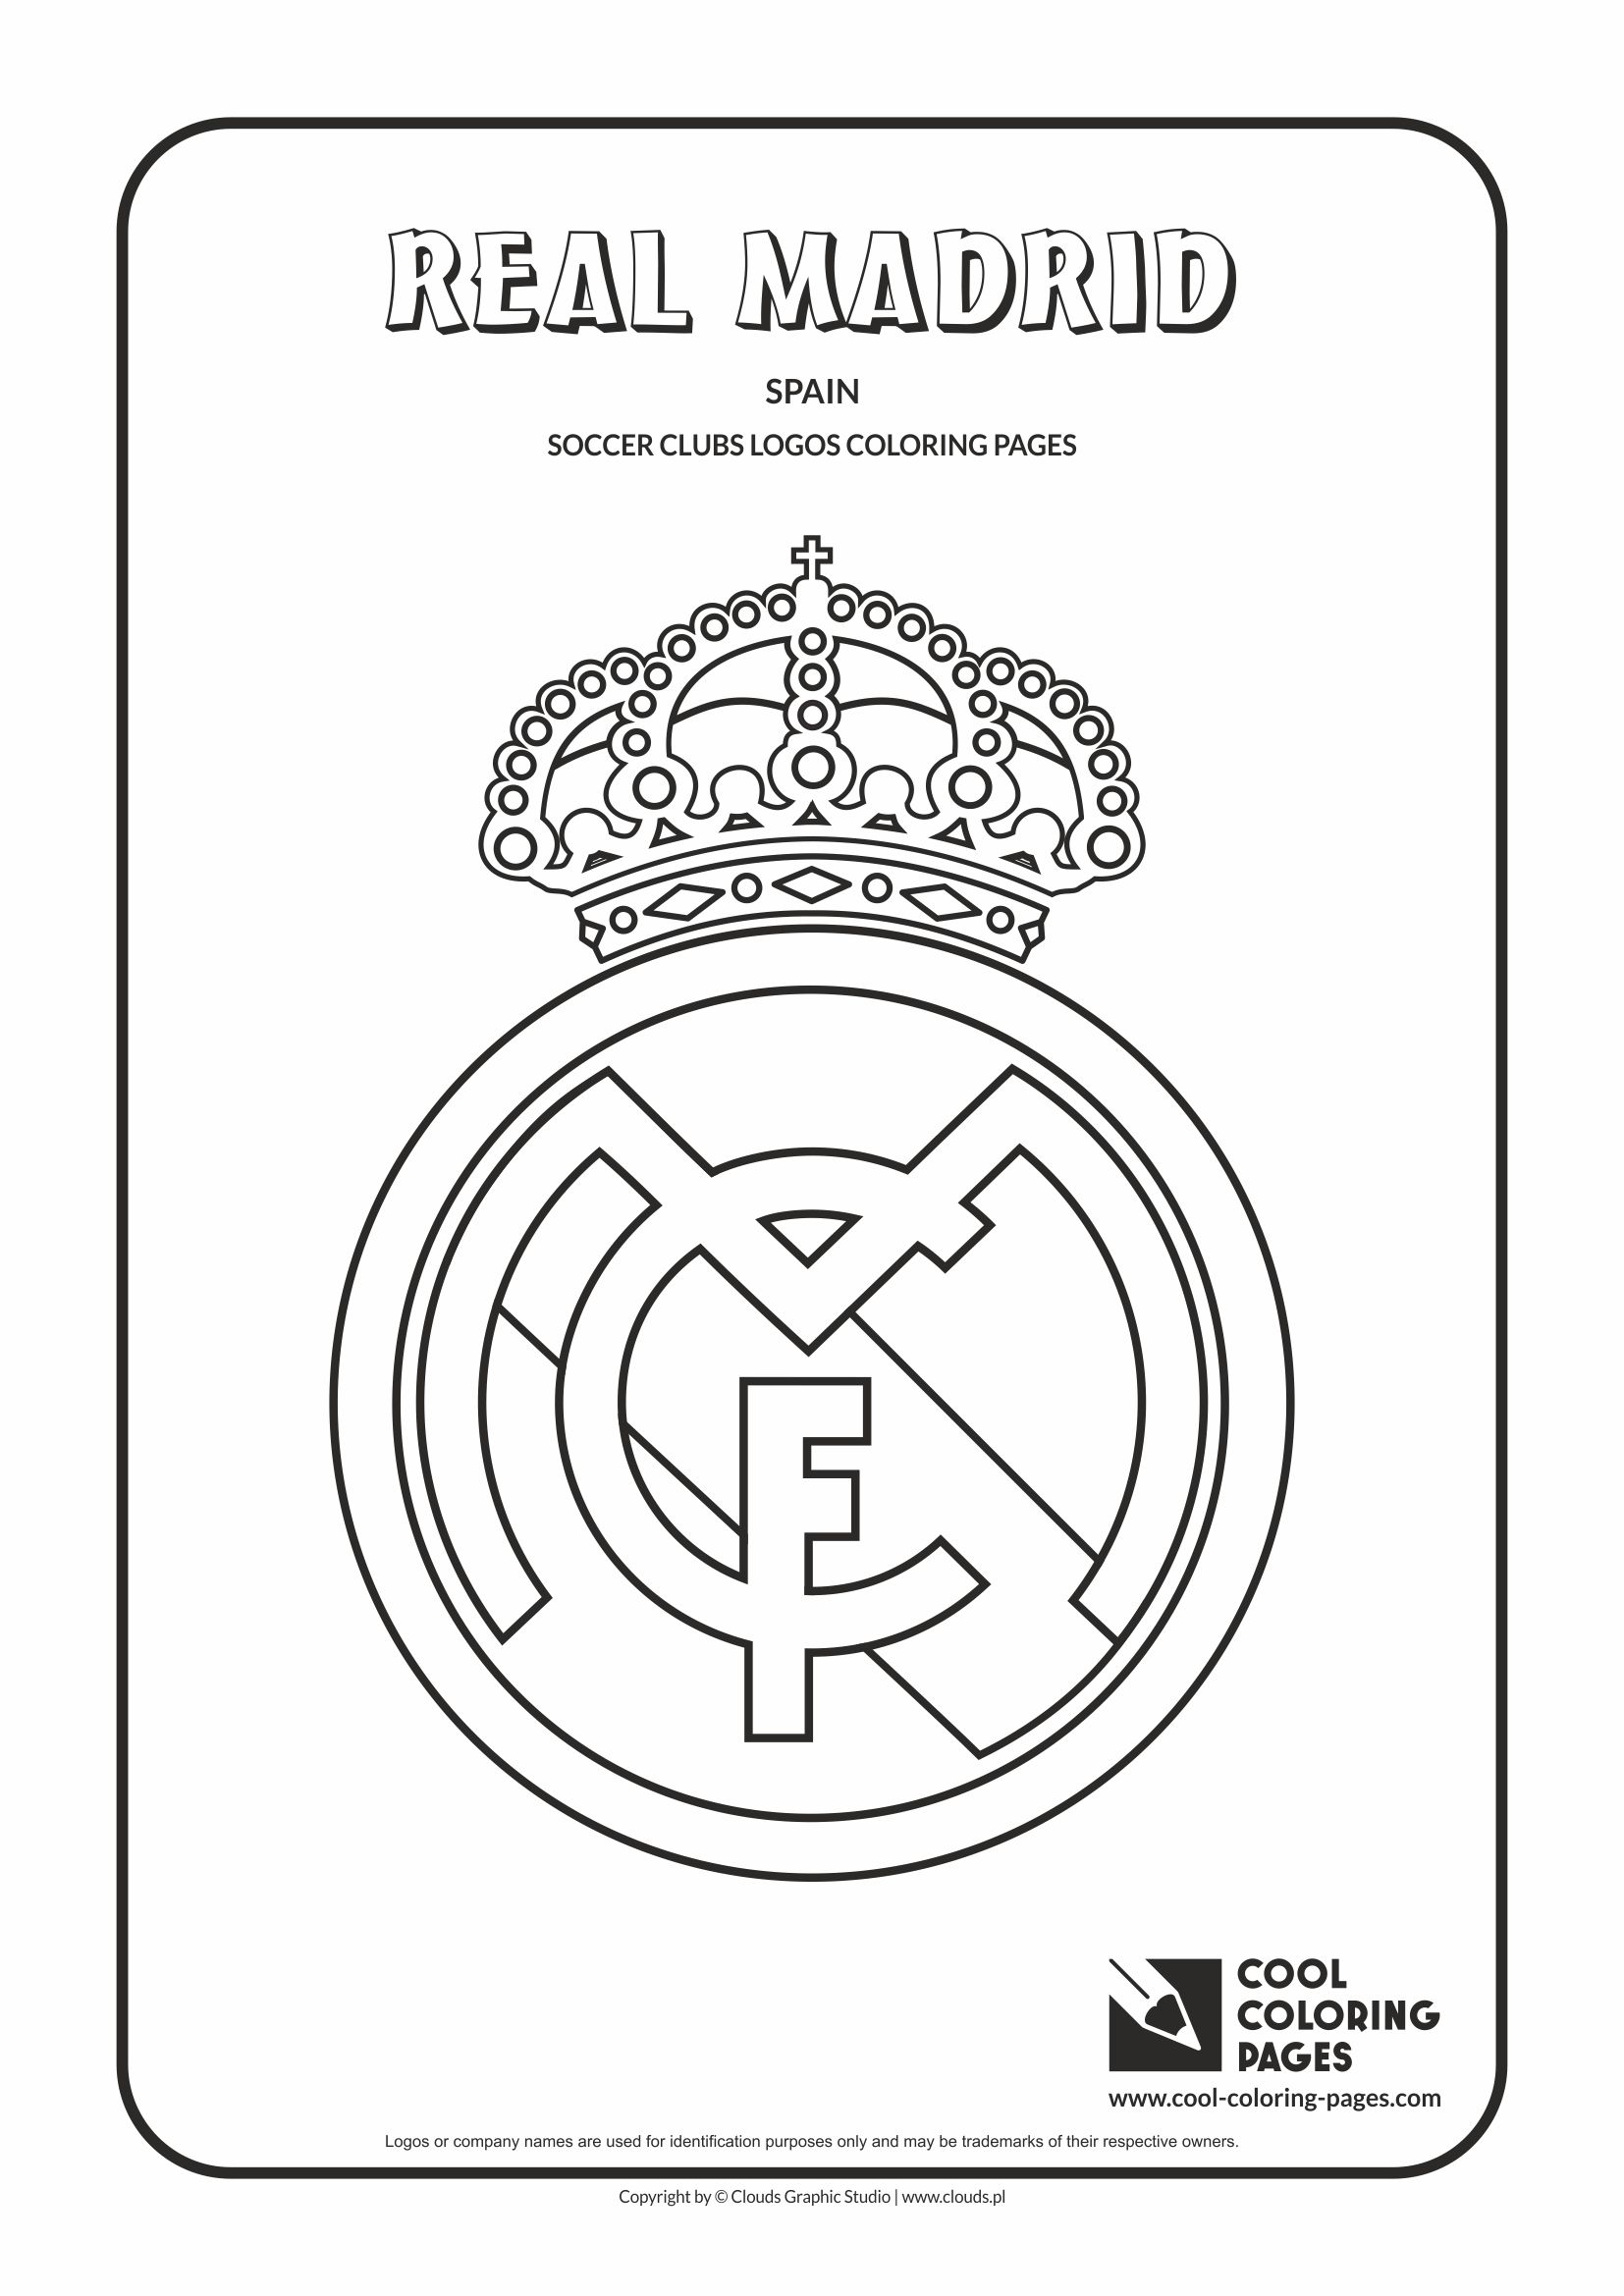 Emblems of Russian Football Championship coloring pages printable games